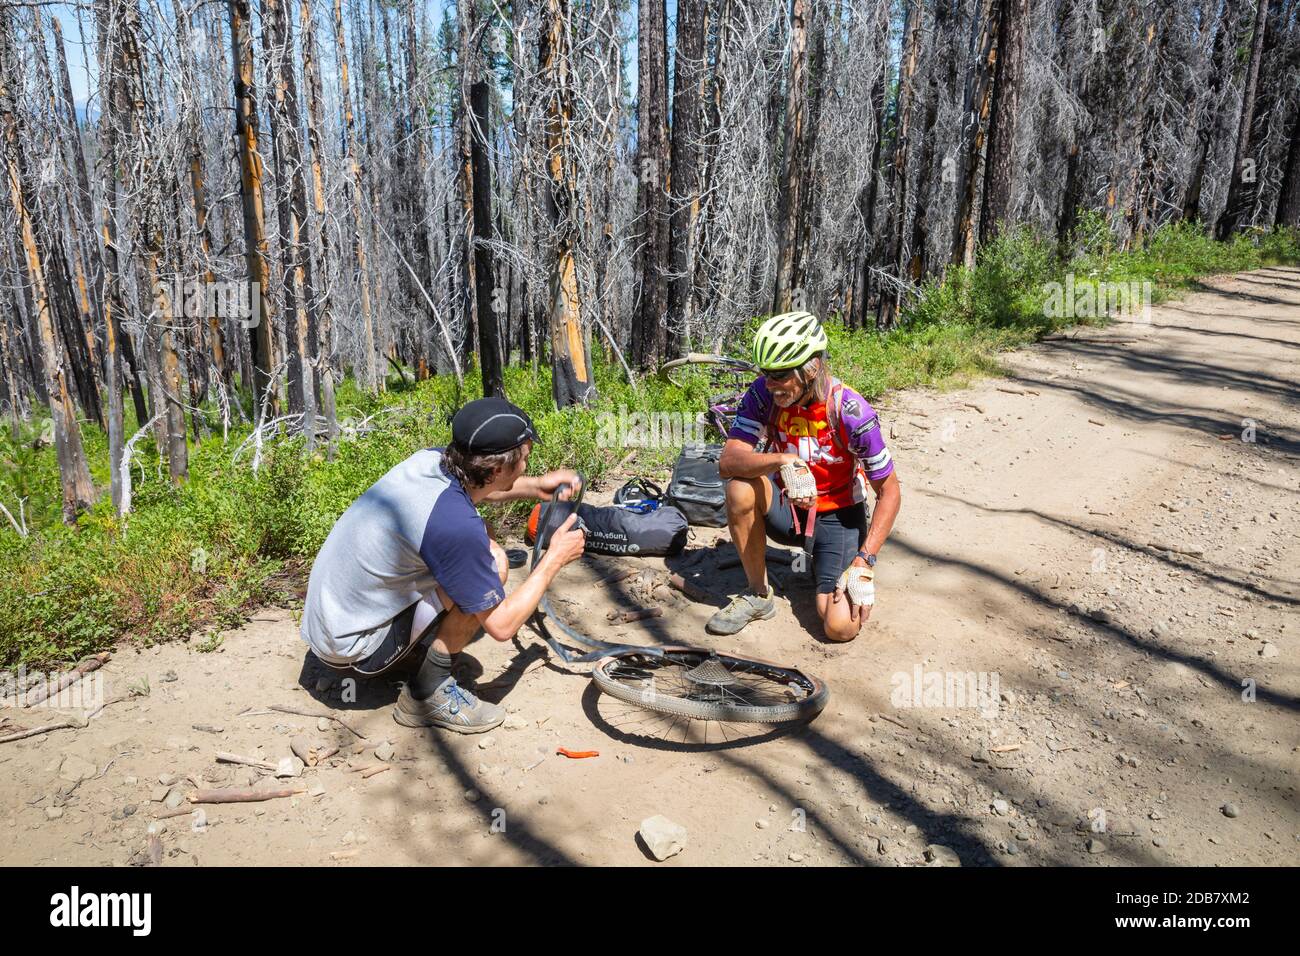 WA18143-00...WASHINGTON - Tom helping and instructing a weekend rider on how to fix a flat tire on Road 9712 on Table Mountain in the Wenatchee Nation Stock Photo